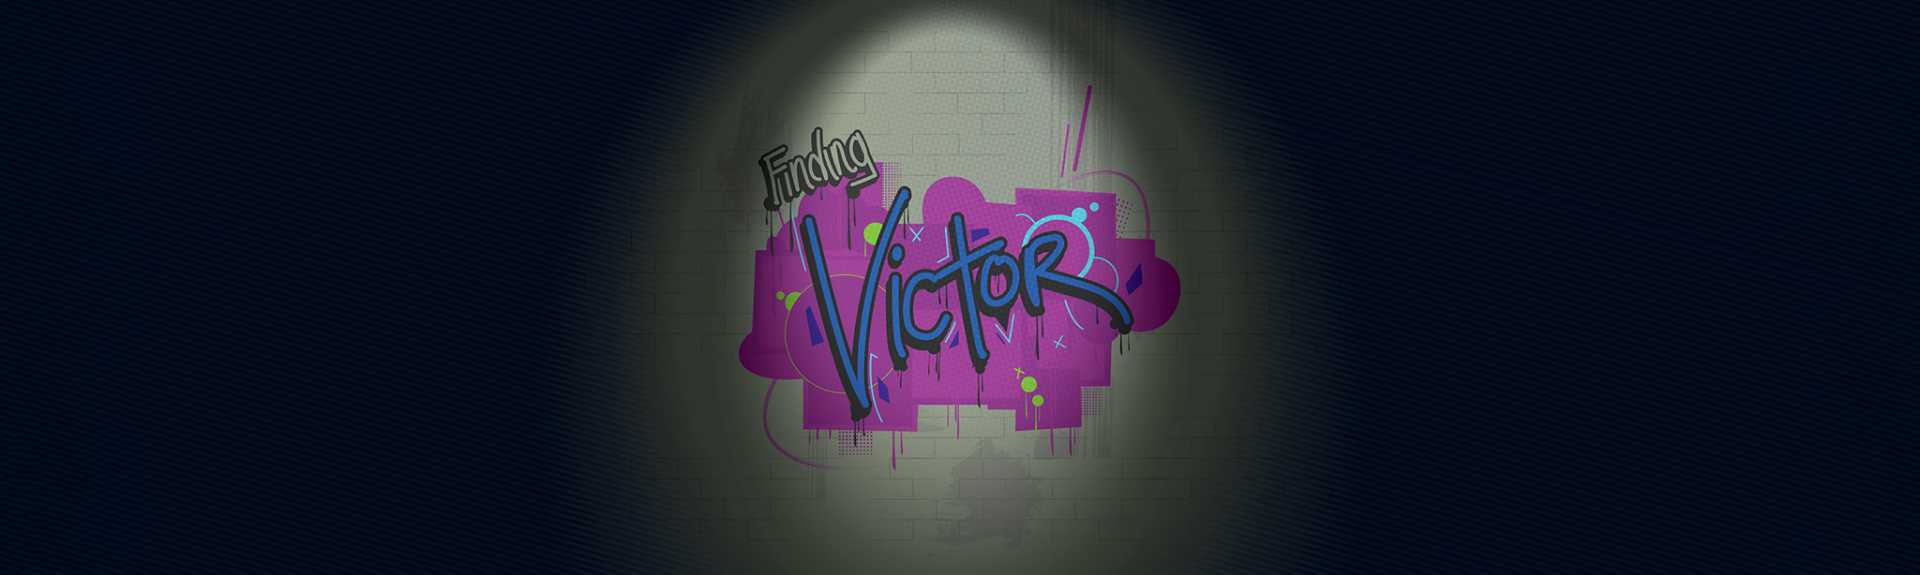 Finding Victor